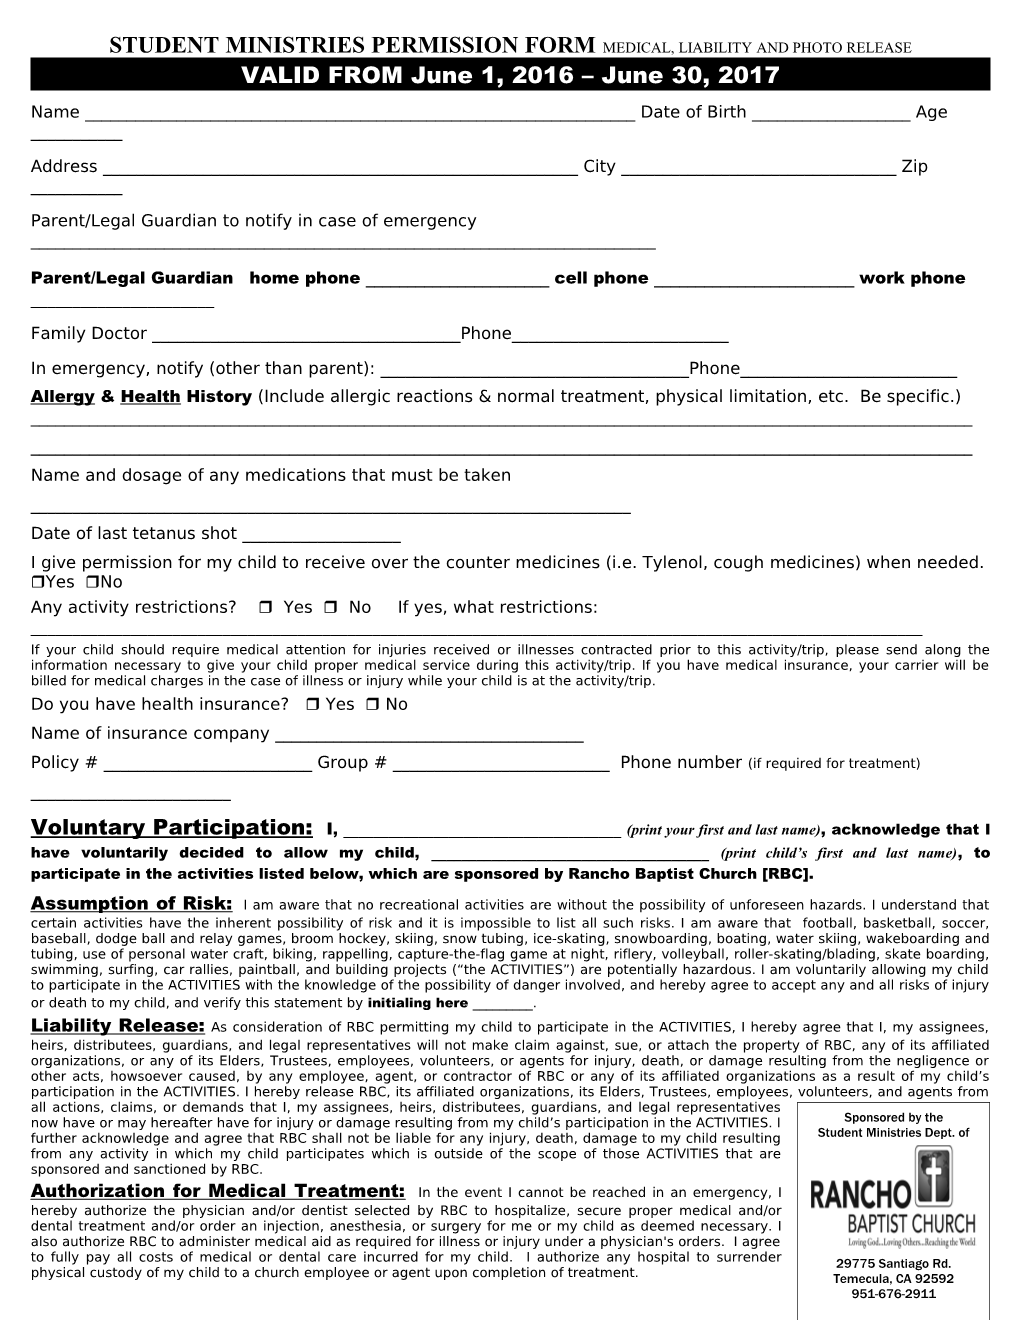 Student Ministries Permission Form Medical, Liability and Photo Release